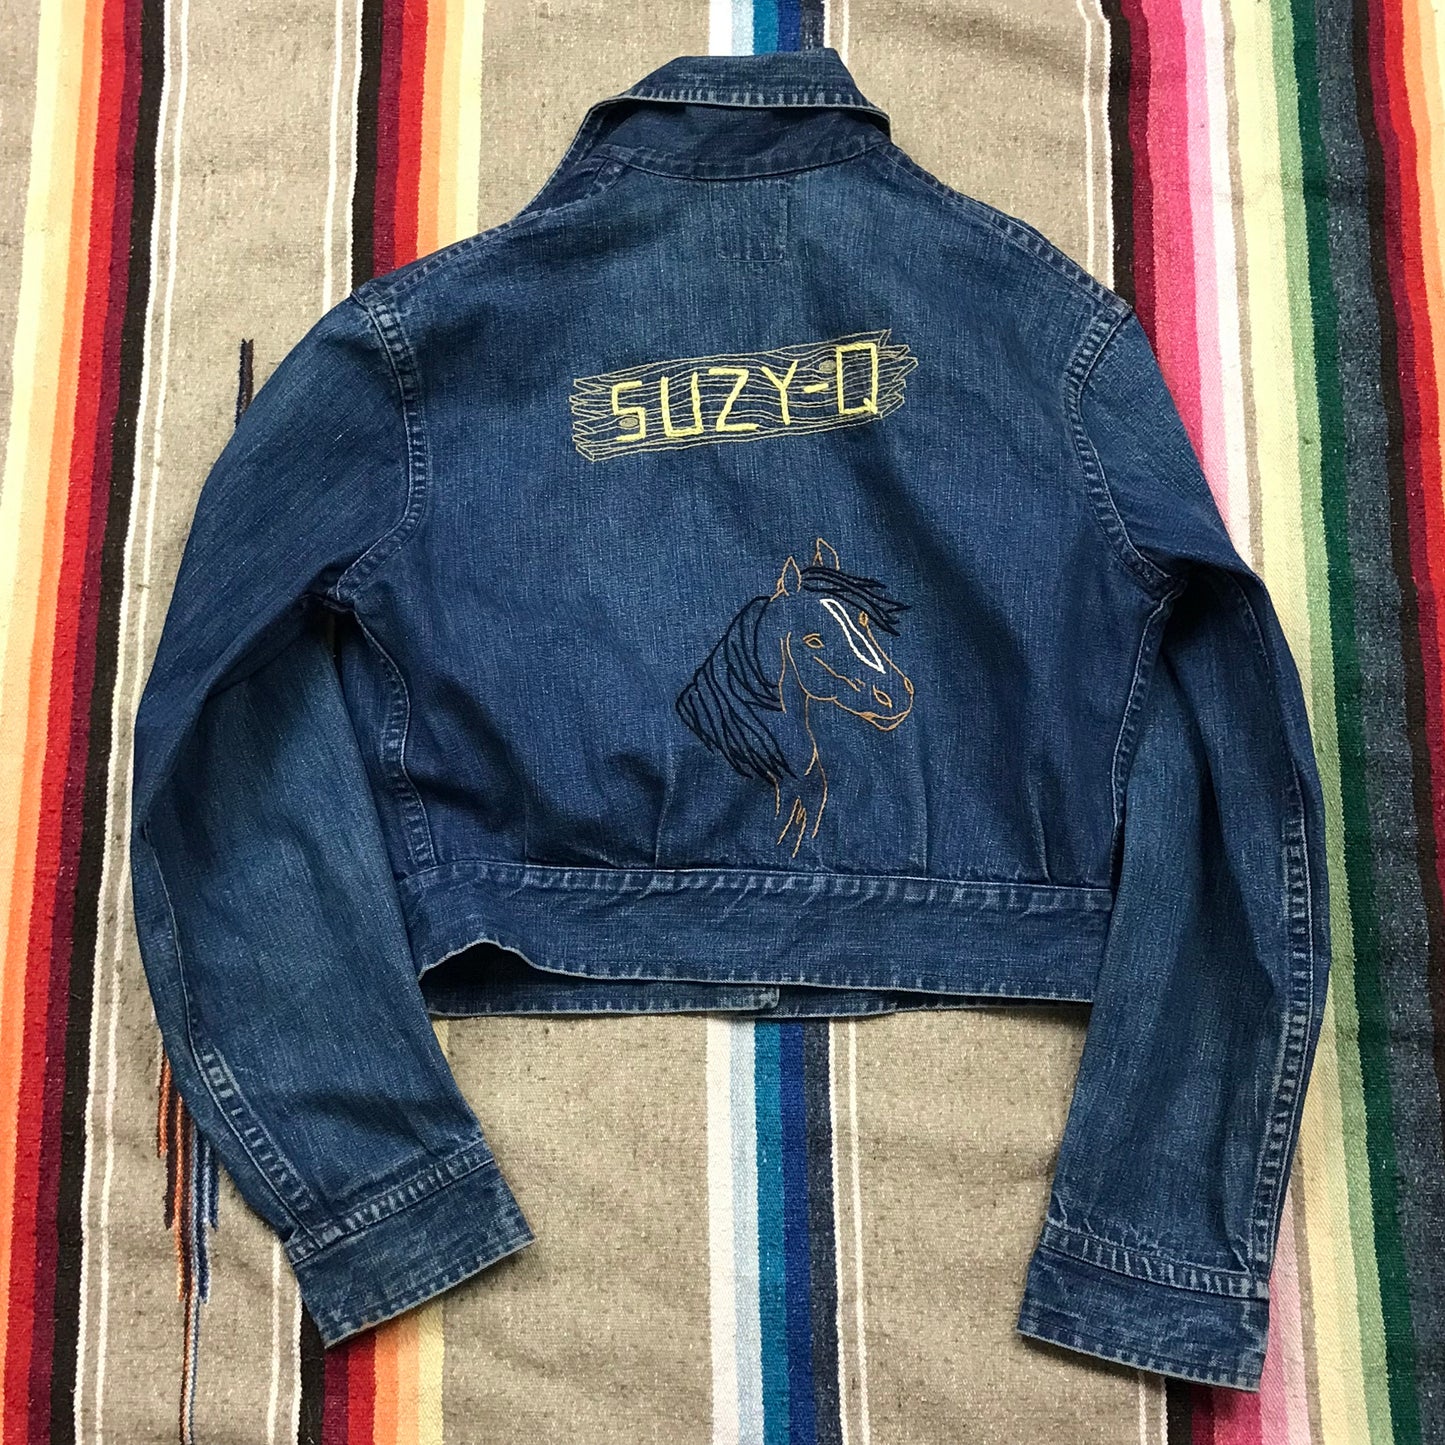 1950s Levi's Shorthorn Denim Ranch Jacket Embroidered "Vicky" Suzy Q Horse Made in USA Womens Size XS/S